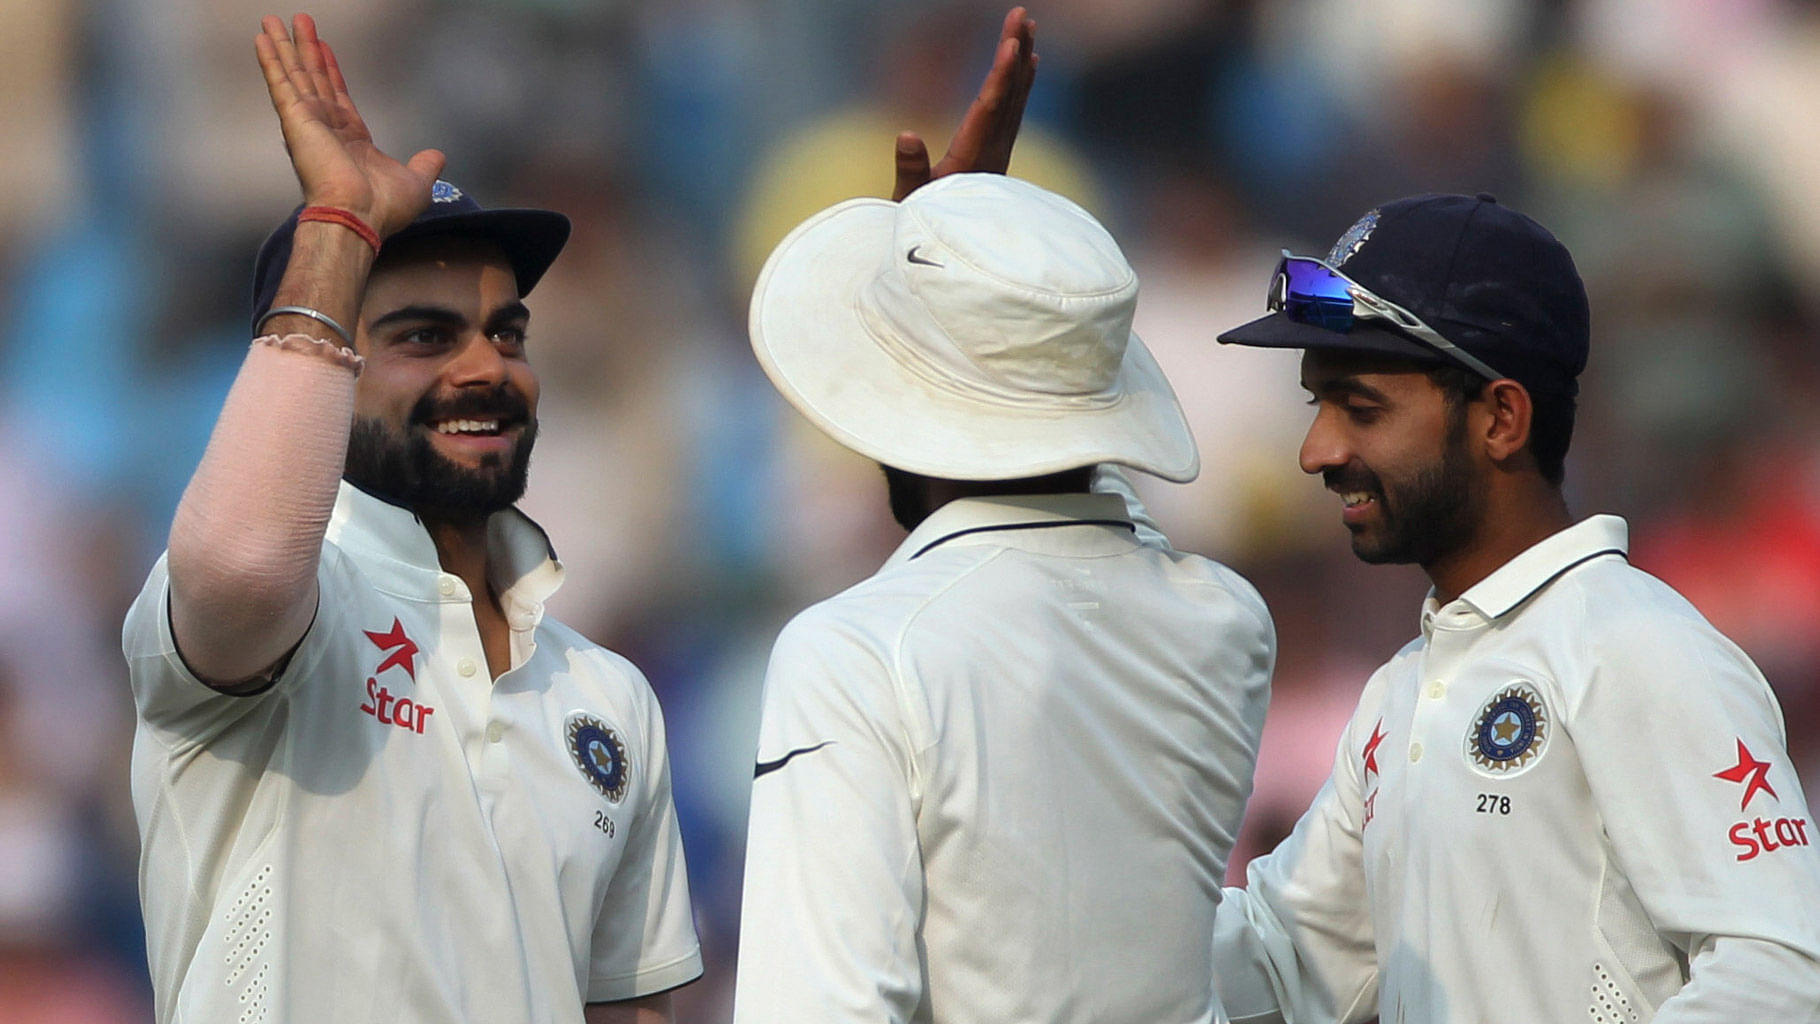 Indian cricketers, (from left to right), Virat Kohli, Ravindra Jadeja and Ajinkya Rahane, celebrate as India wins against South Africa on the third day of the third cricket Test match between the two countries in Nagpur,  November 27, 2015. (Photo: AP)